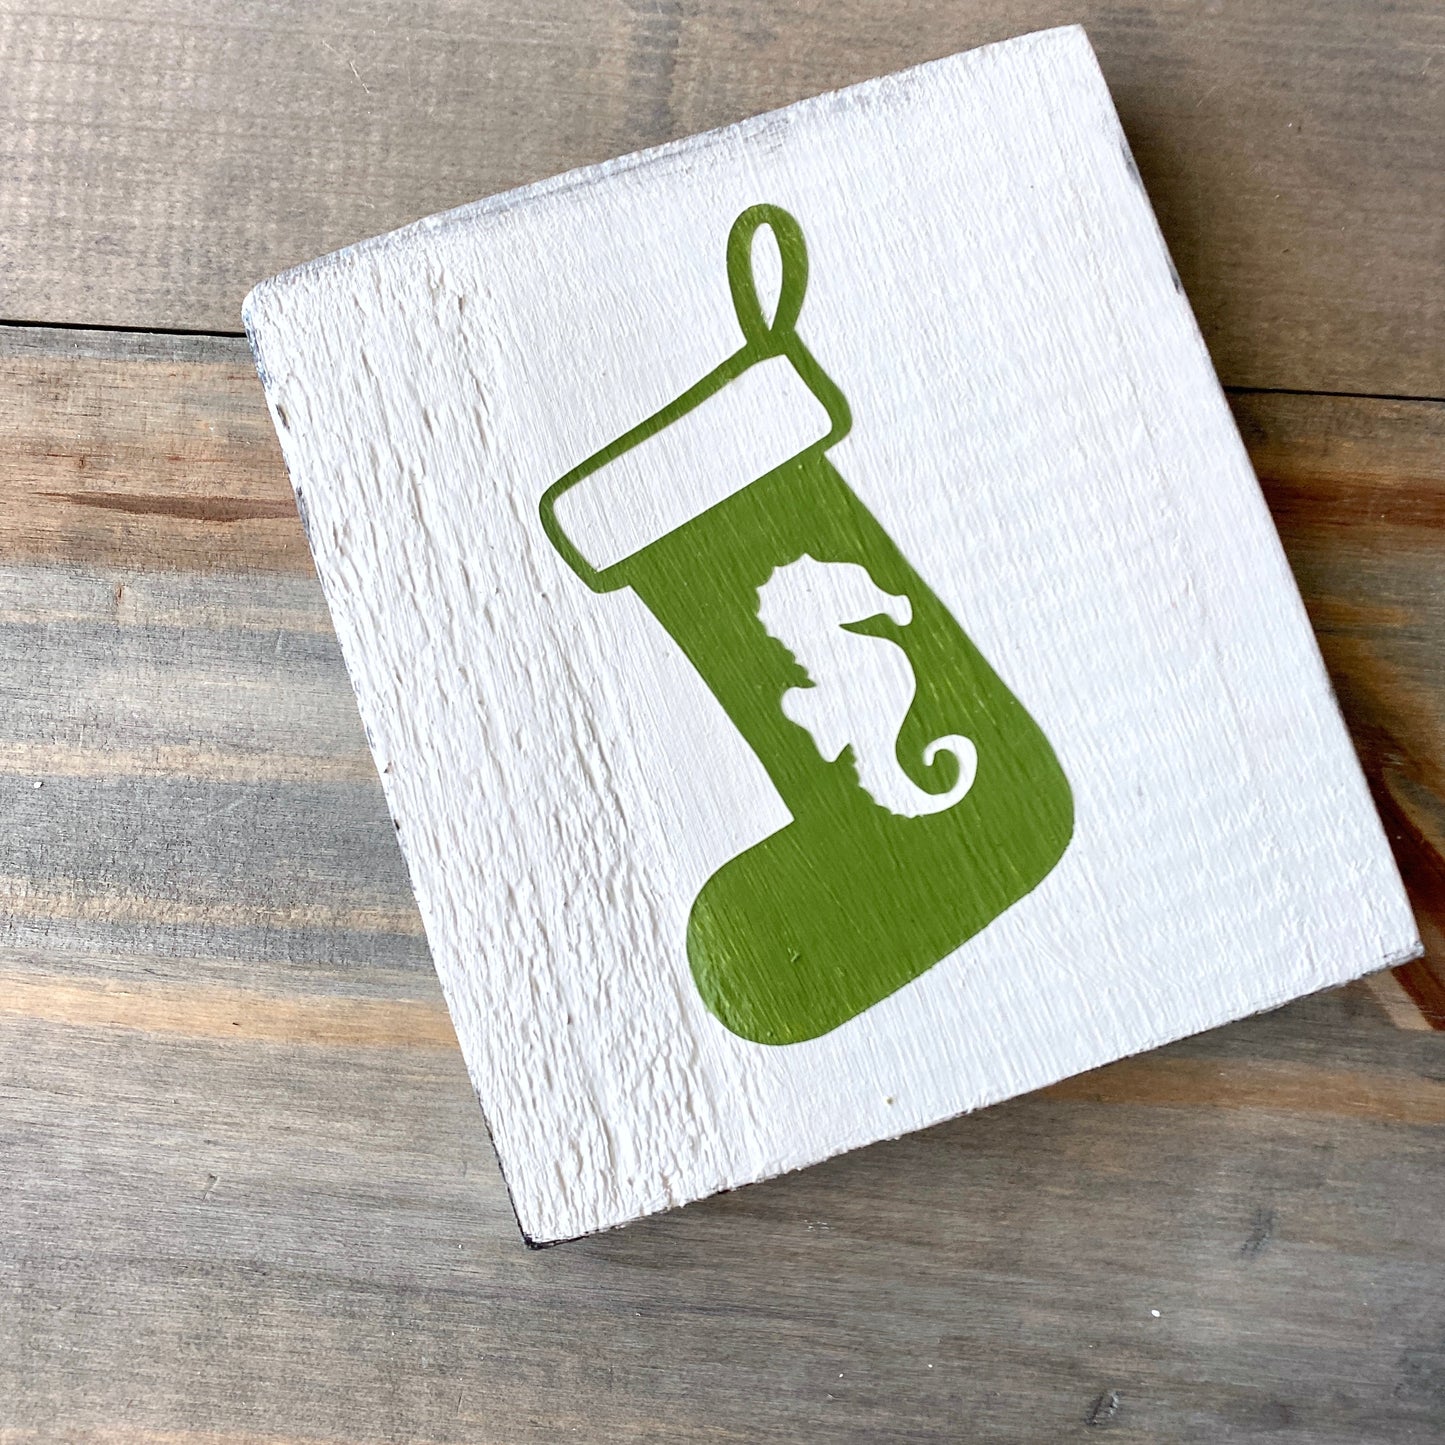 Coastal Christmas sign, sea horse stocking white background with green design, anchored soul designs beach decor